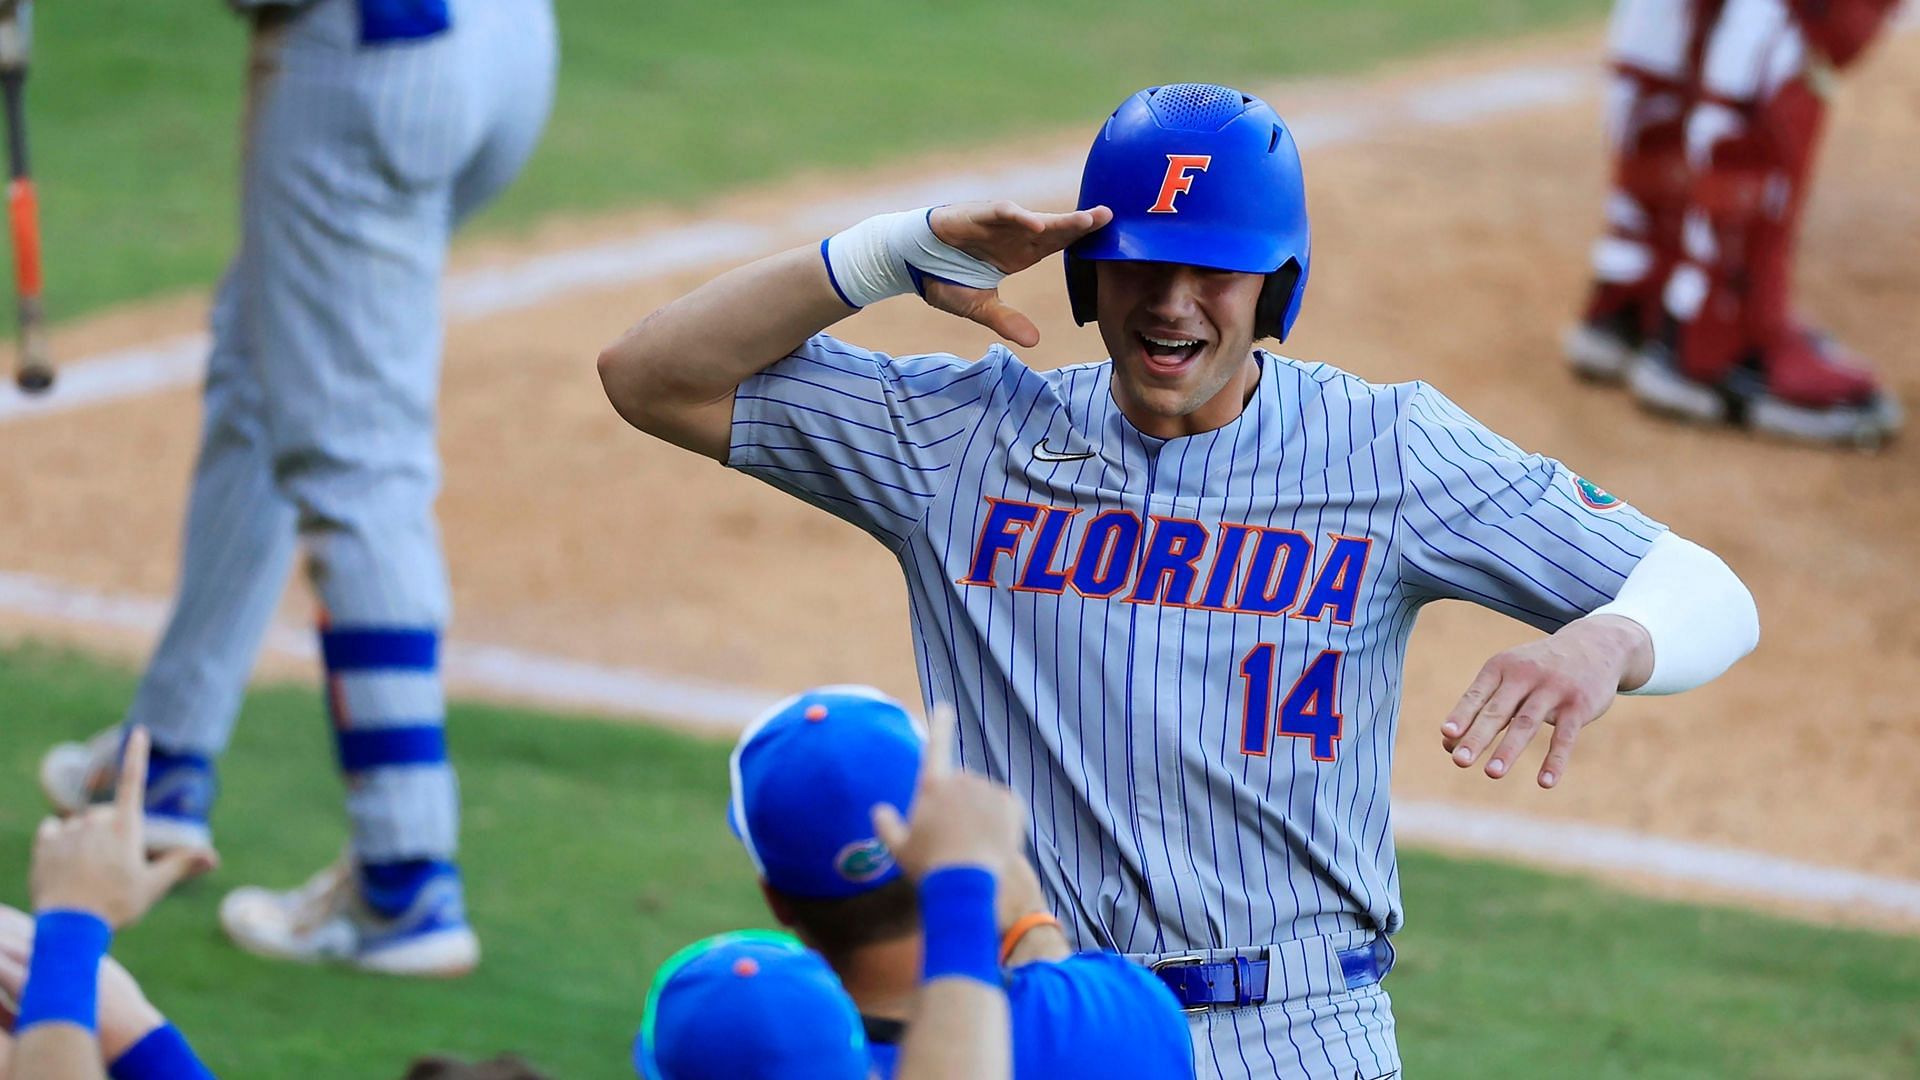 Gators: Top 5 Florida baseball prospects to watch out for in the